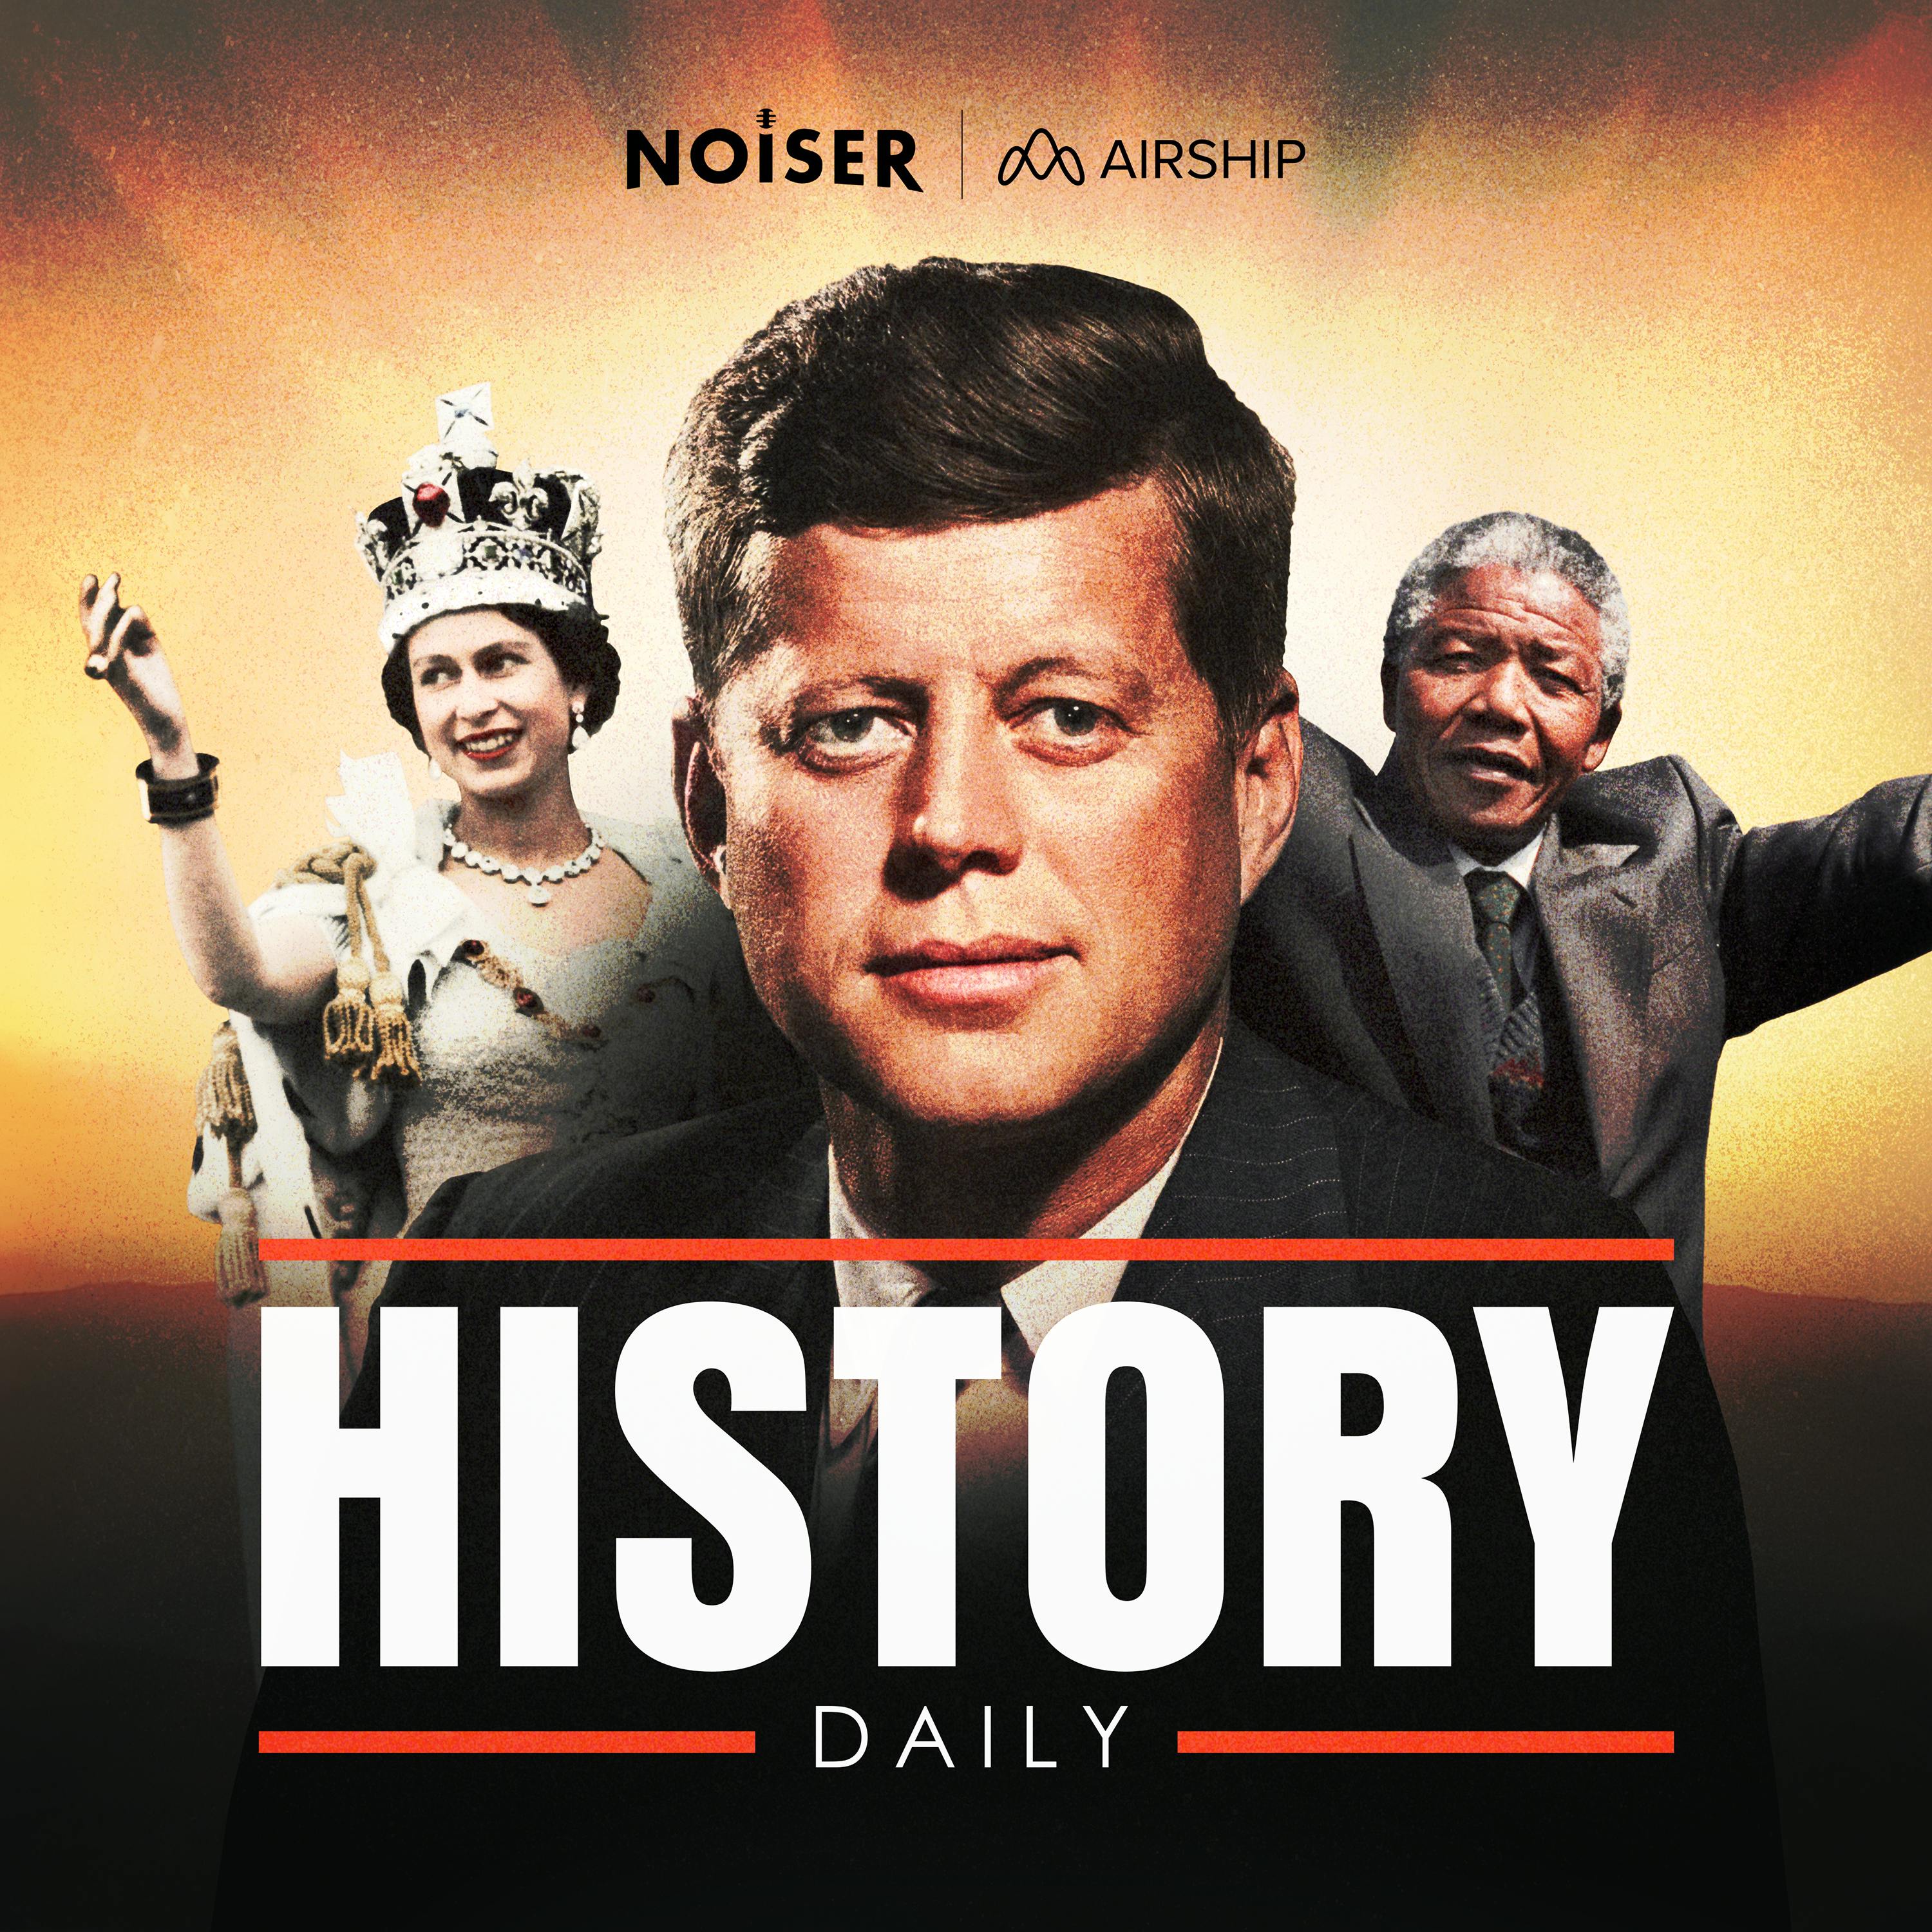 Introducing: History Daily